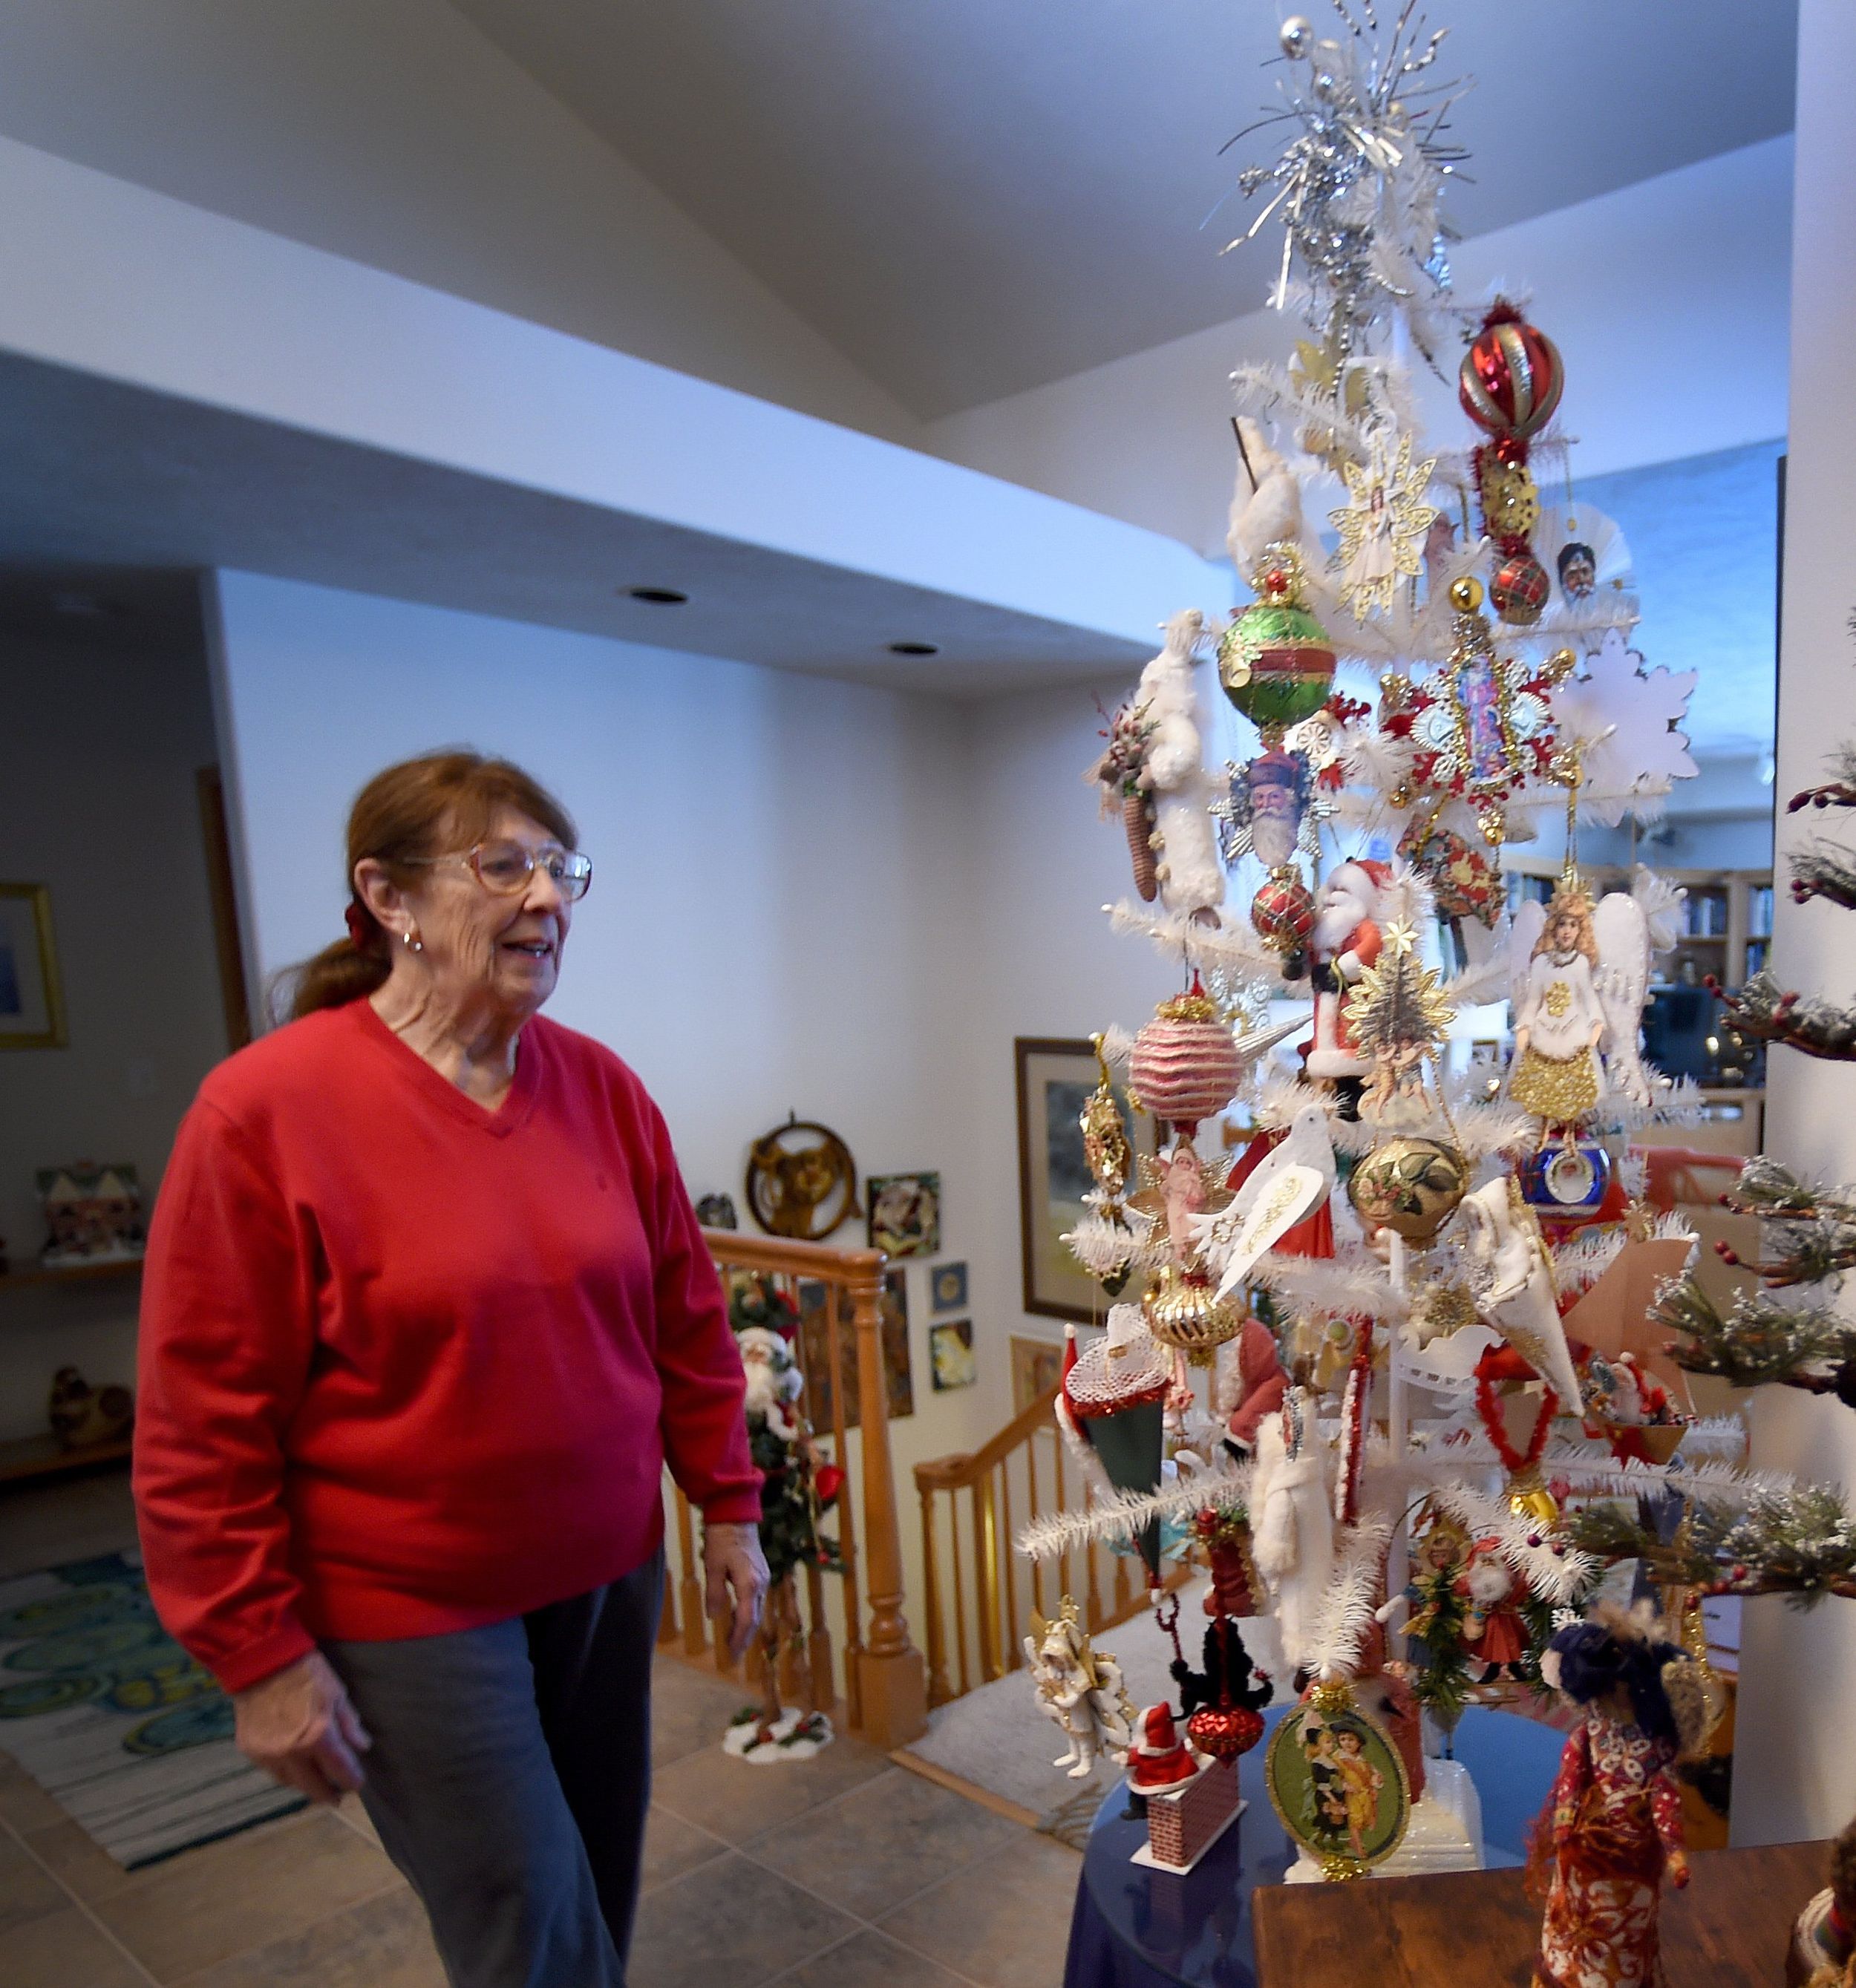 A Christmas tree overloaded with a hodgepodge of sentimental ornaments  accumulated over the years